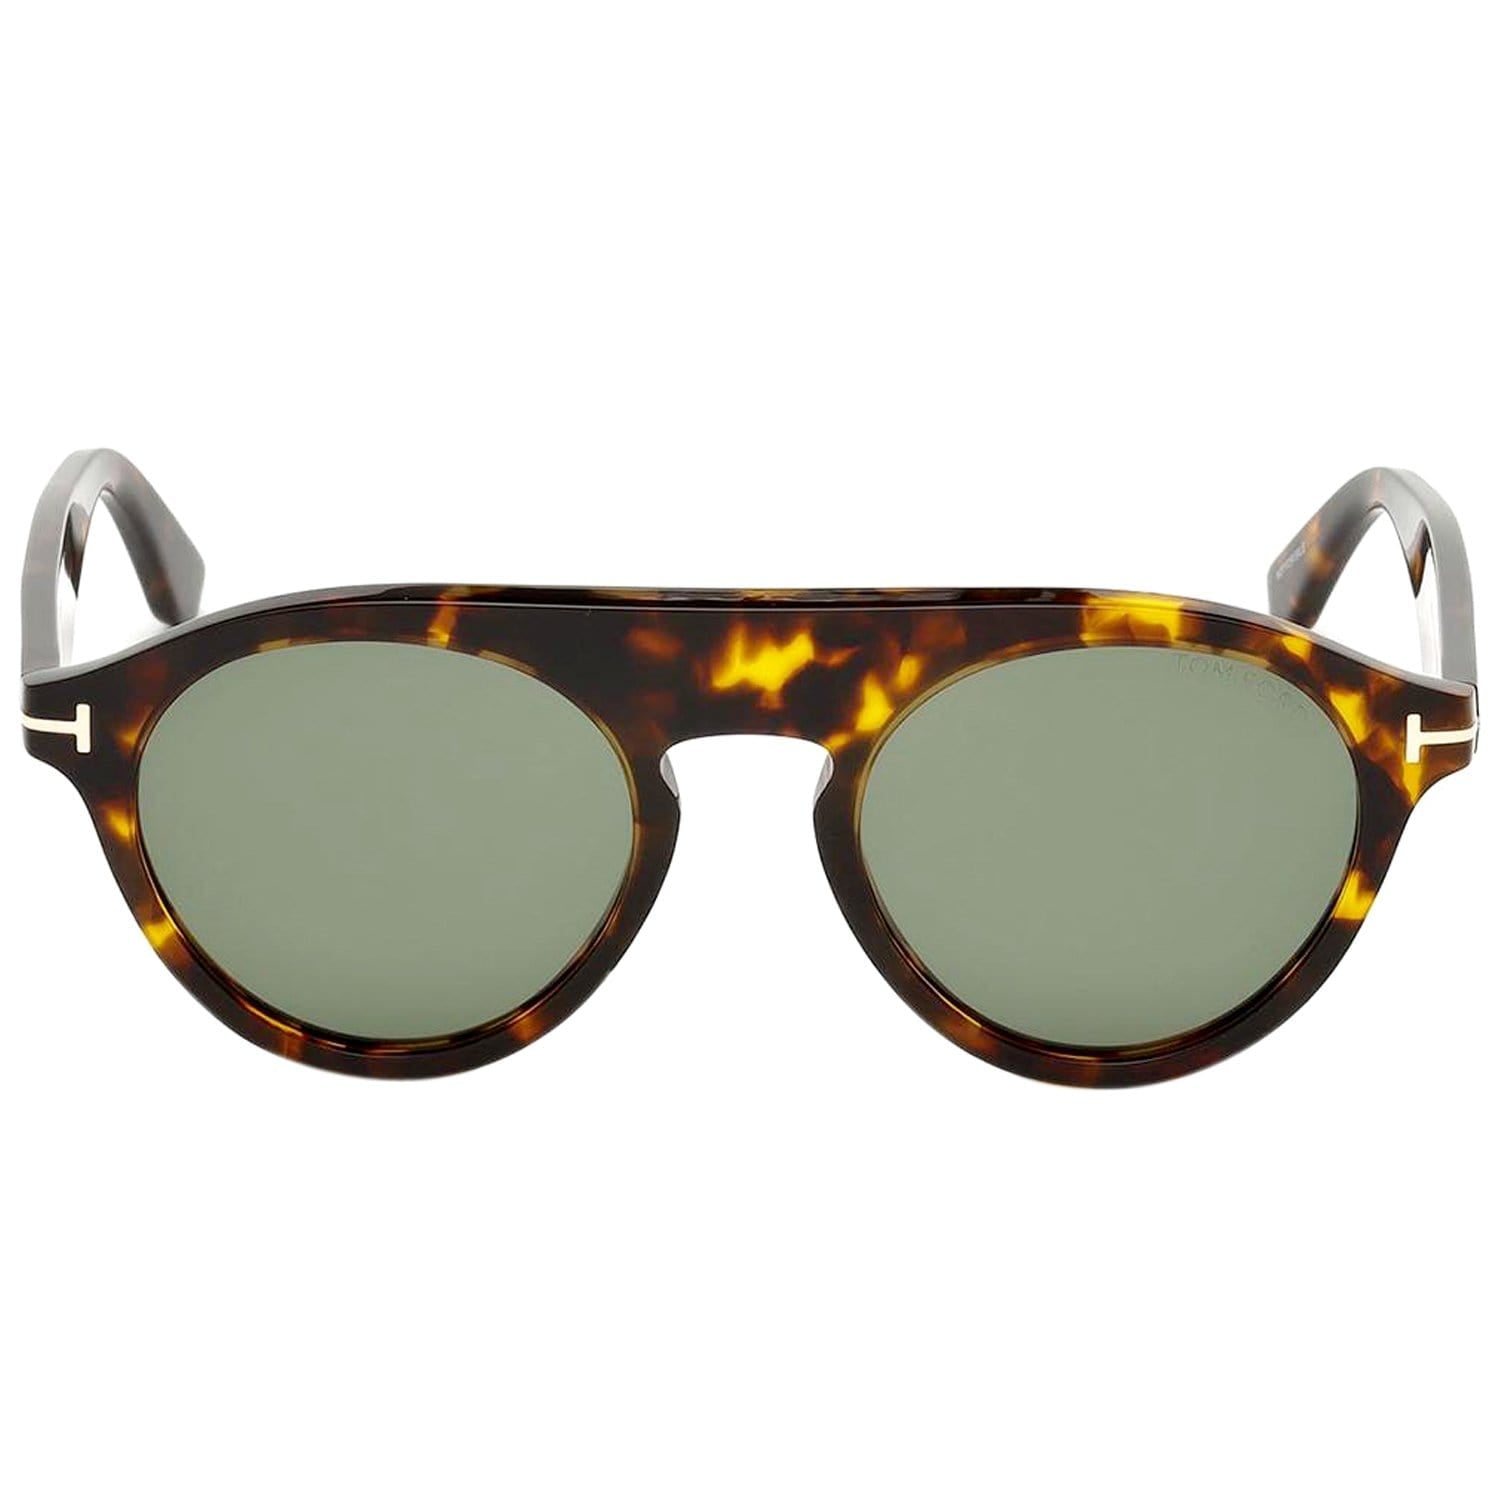 TOM FORD Christopher FT0633 52A 49 Round Unisex Sunglasses Smoke Lens